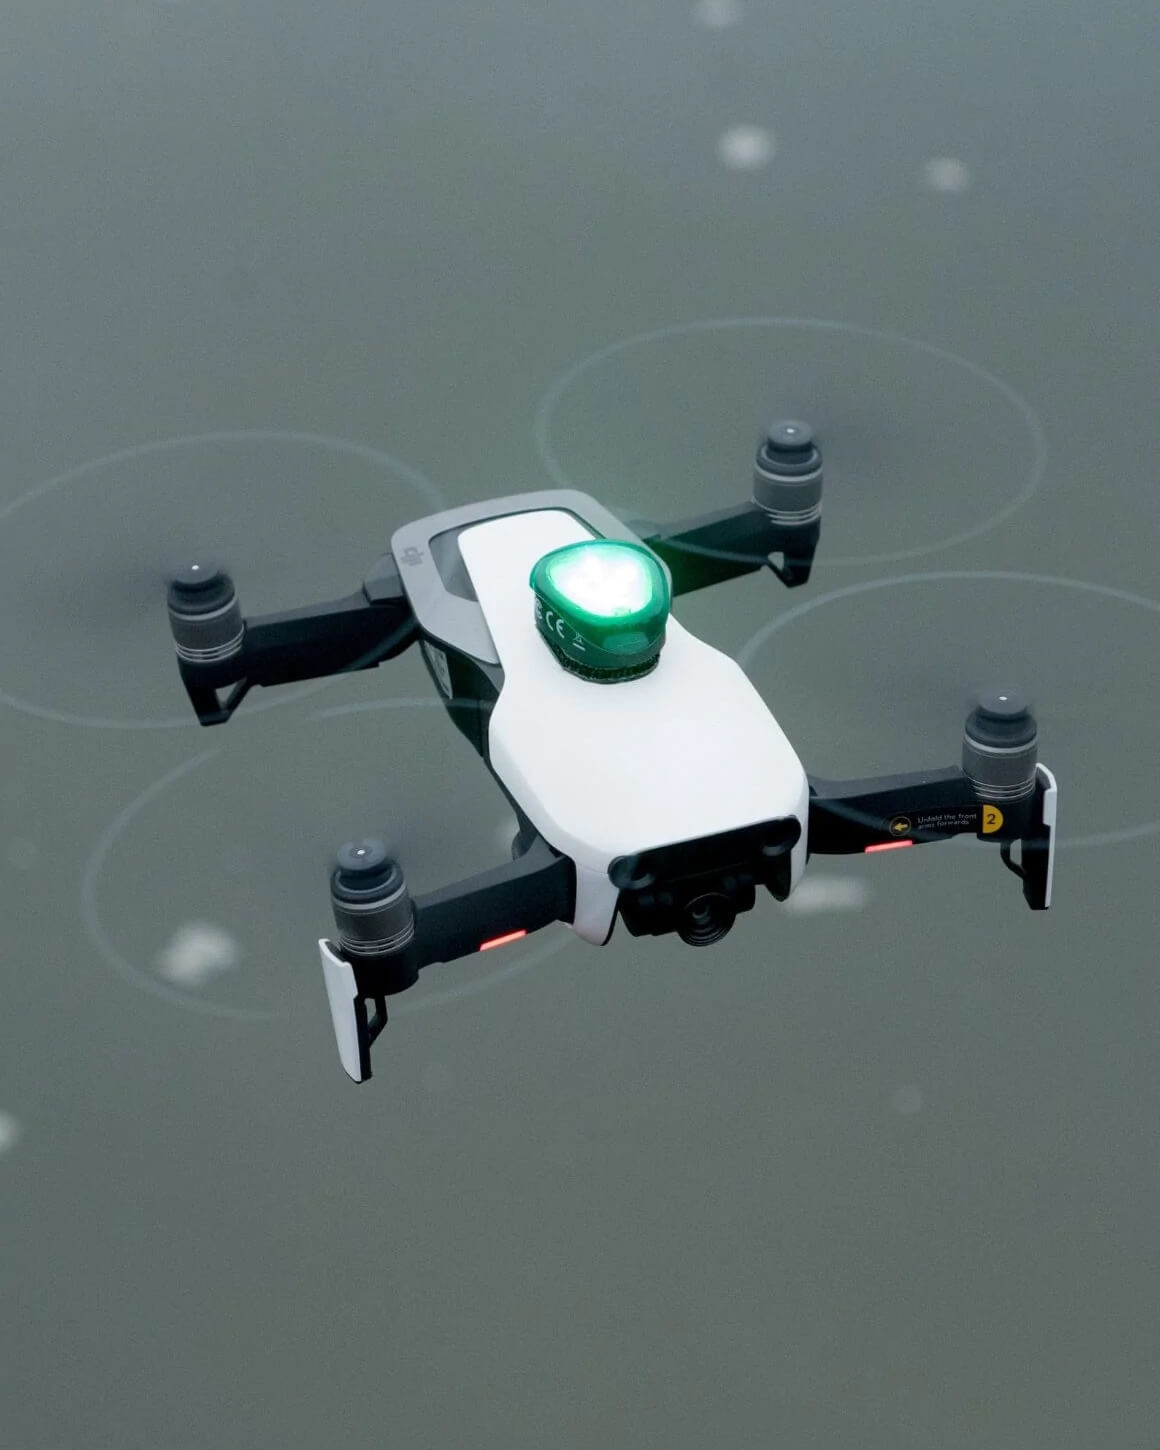 Black and white drone with Lume Cube Strobe Anti-Collision Lighting mounted on top using the Green plastic cover cap.